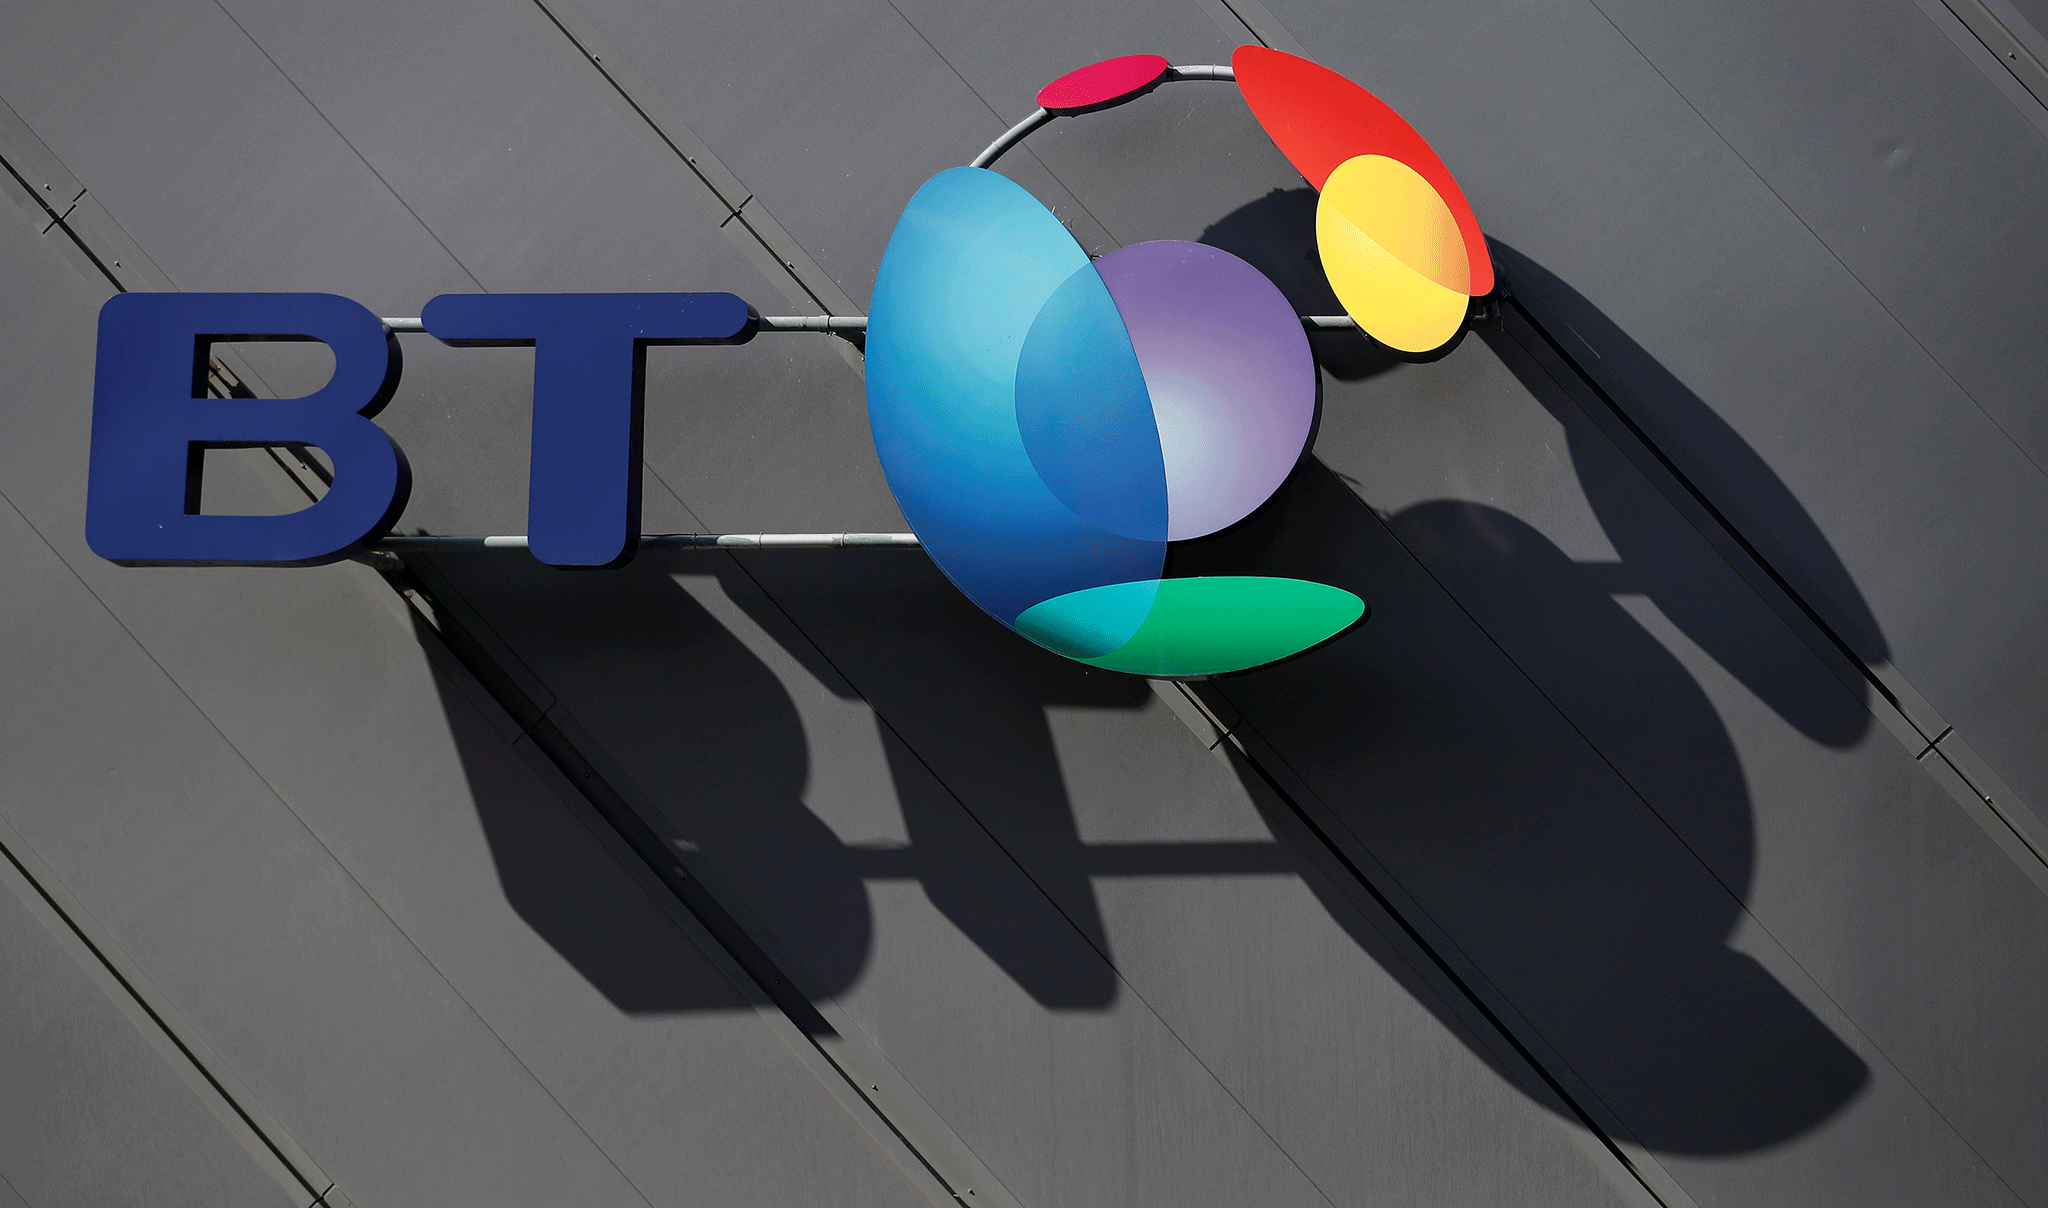 BT gets record fine, Tesco's is coming, but does it matter?